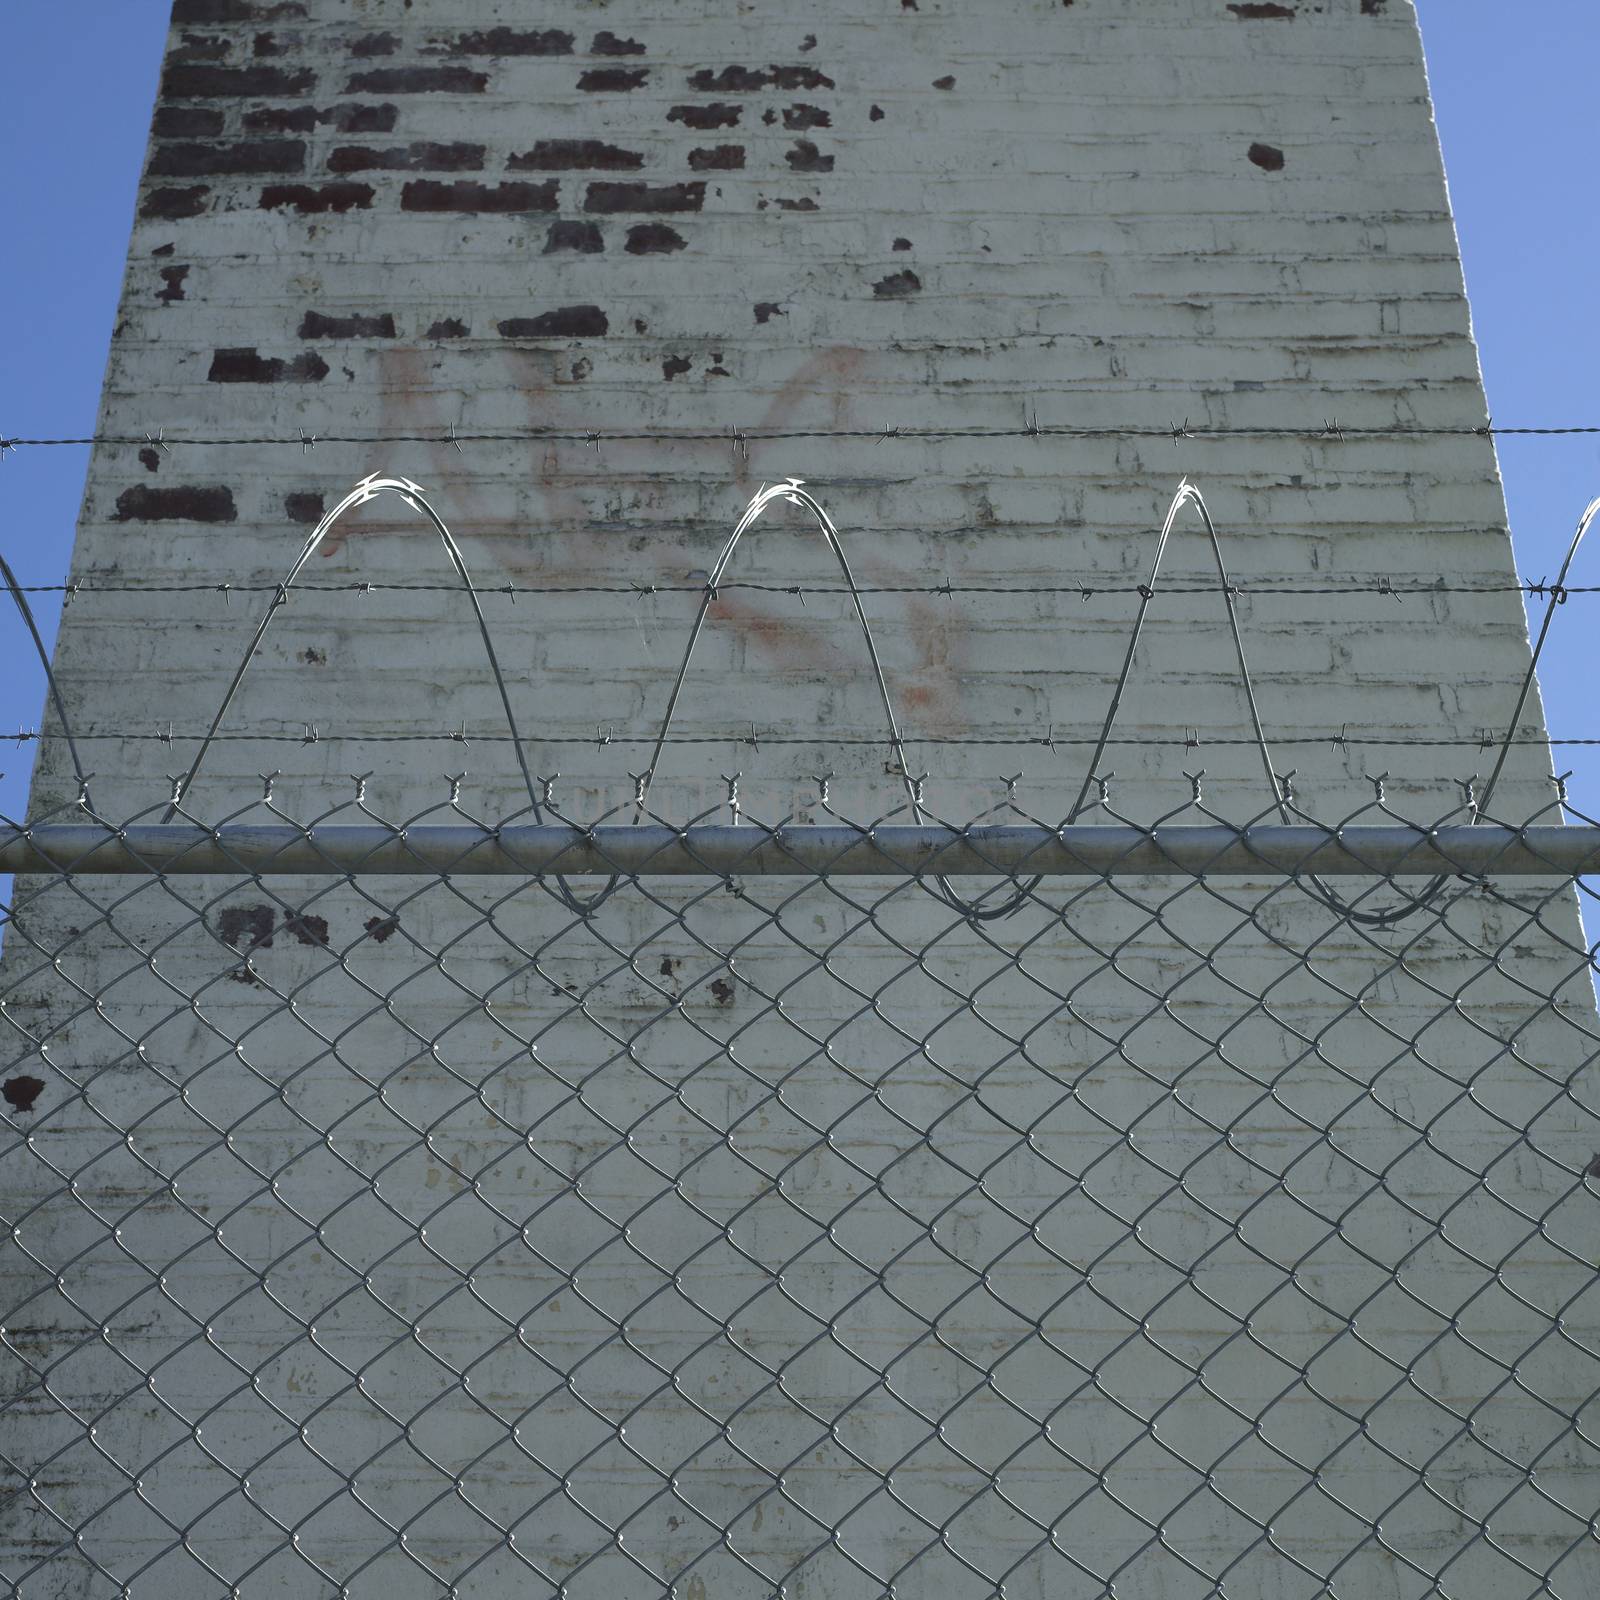 Tall brick chimney behind barbed wire fence